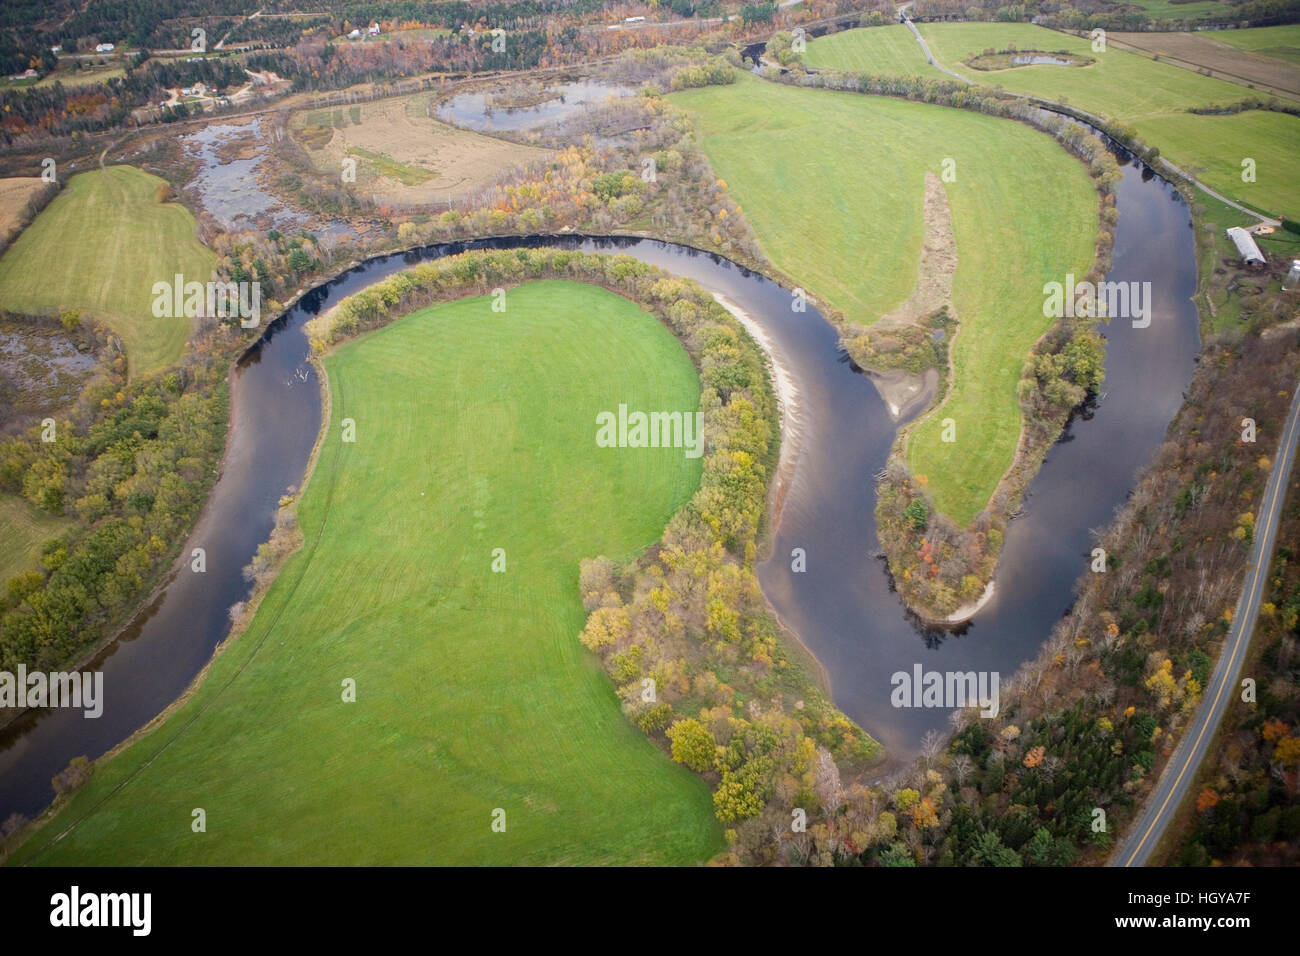 An aerial view of the Maidstone Bend section of the Connecticut River in Maidstone, Vermont. Stock Photo